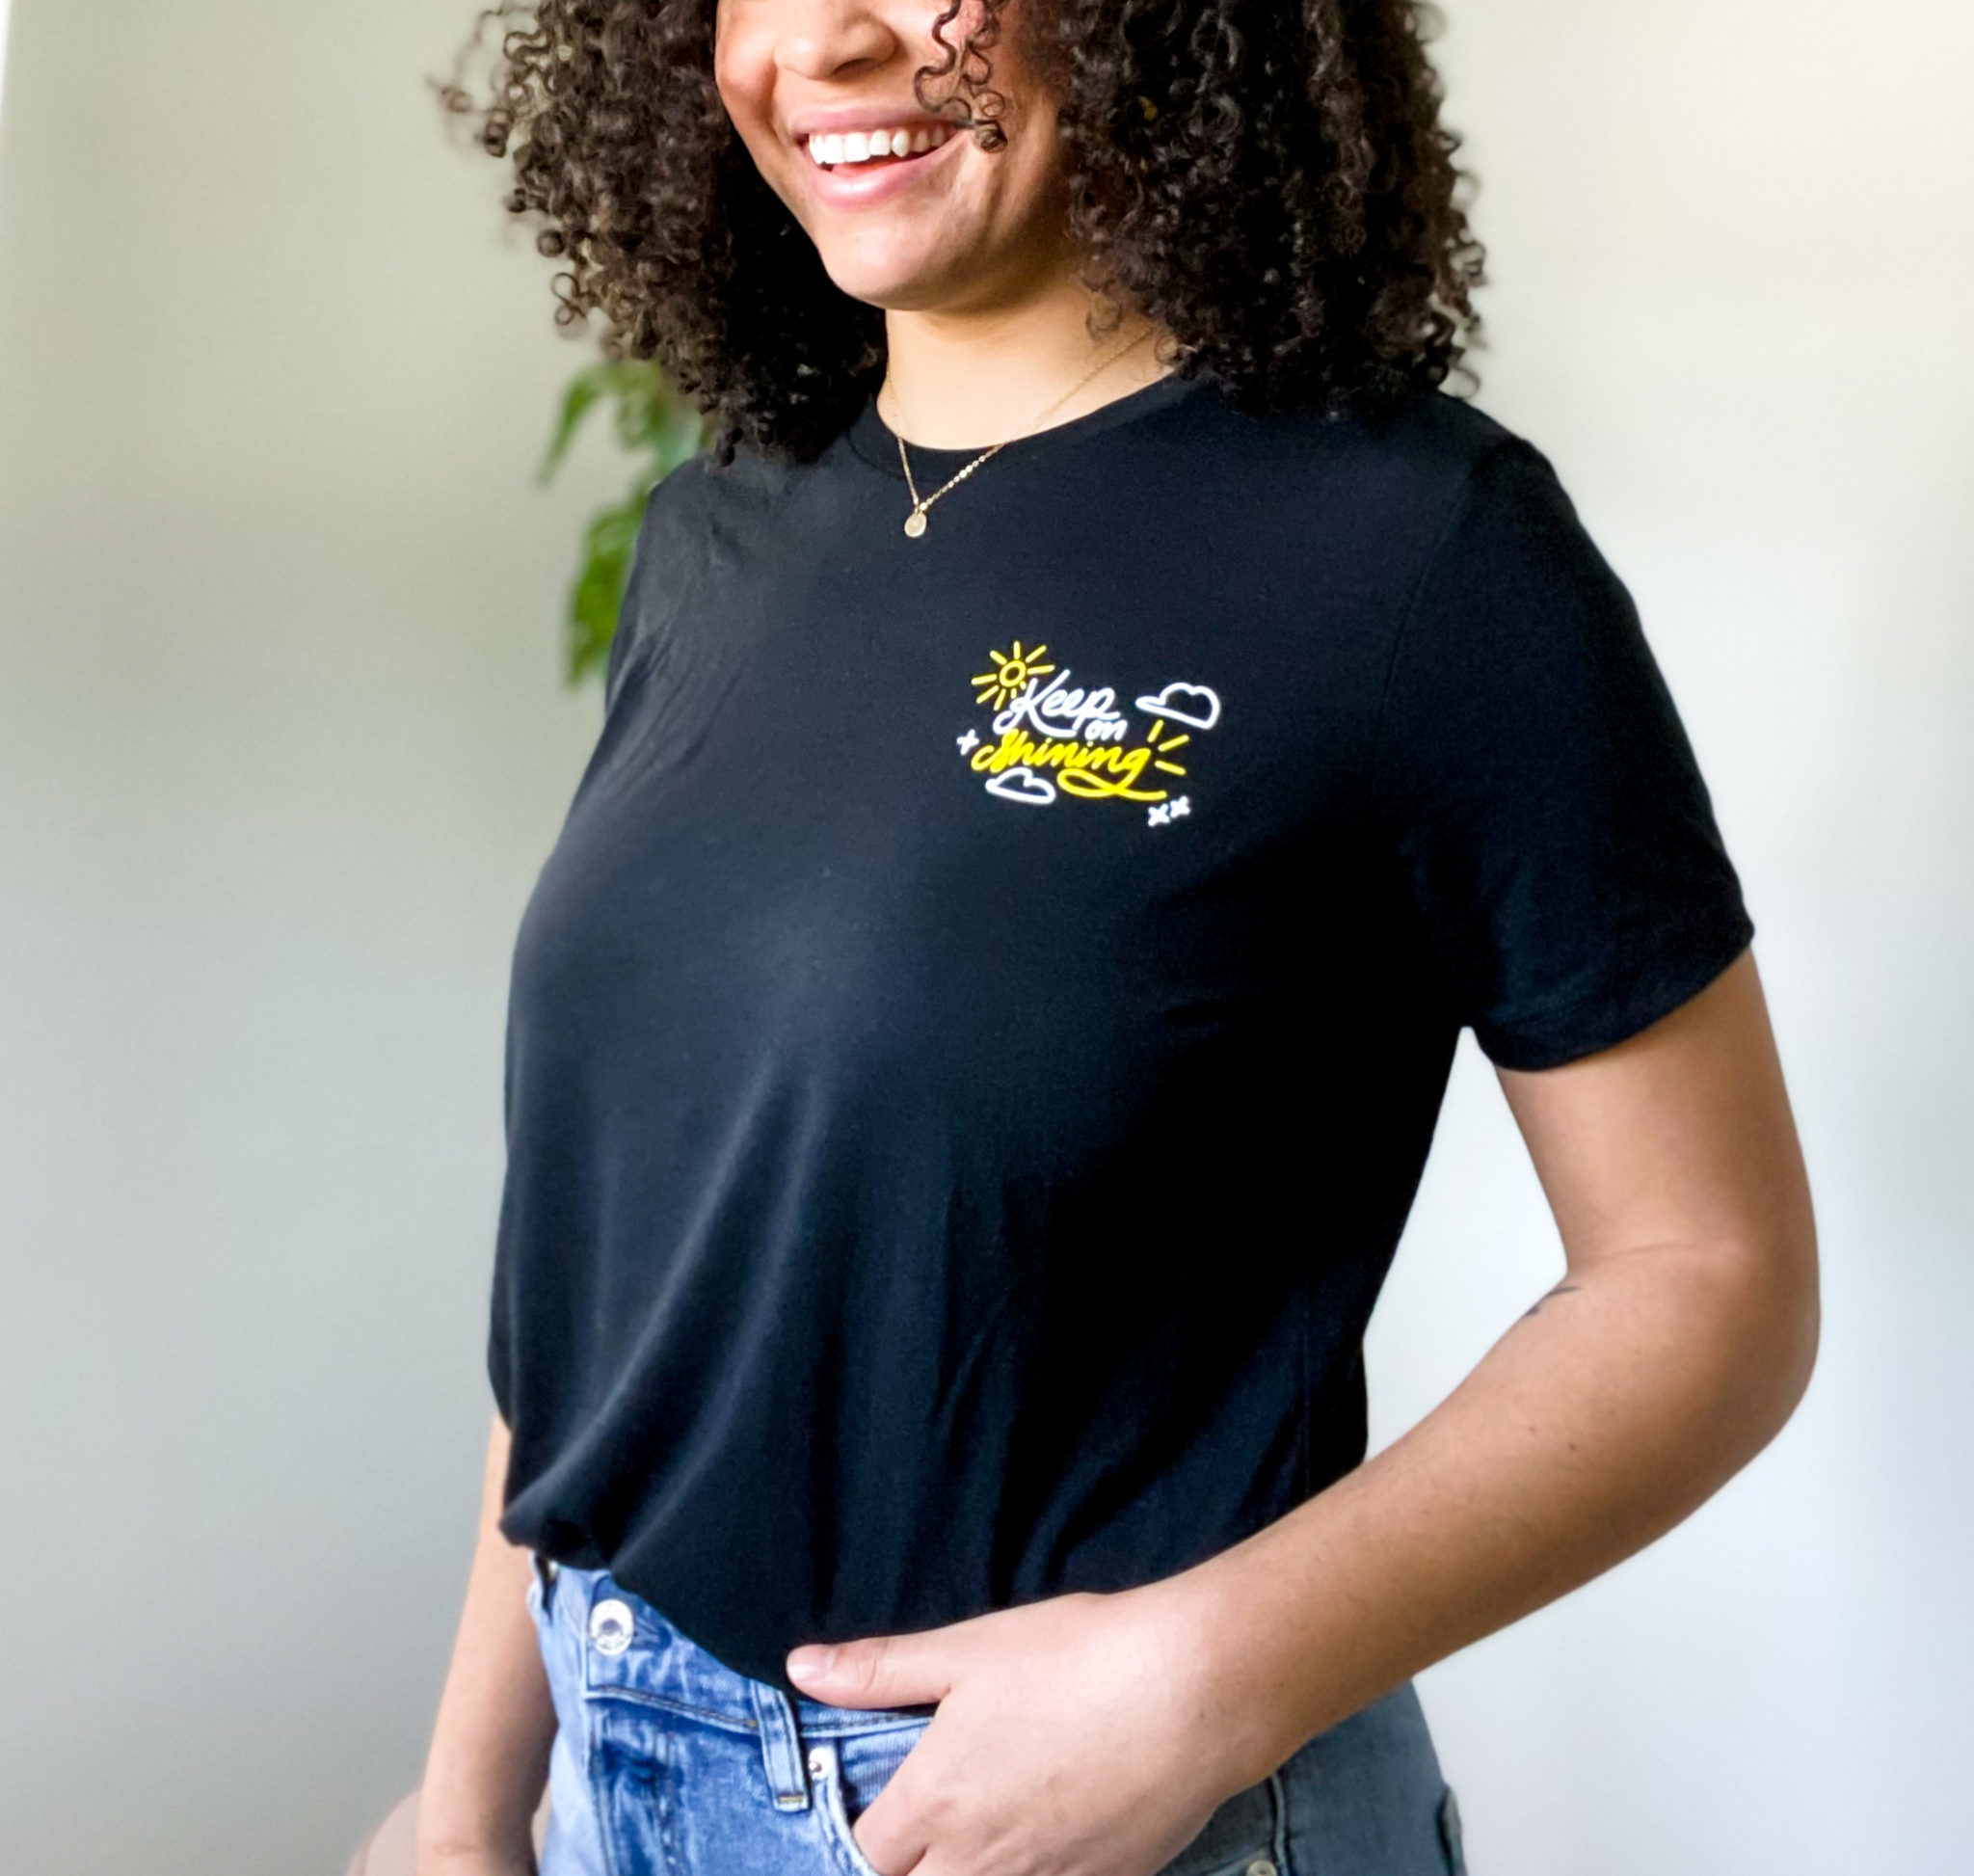 a woman smiles wearing a black custom t-shirt with a yellow and white design that says Keep Smiling with a sun and clouds